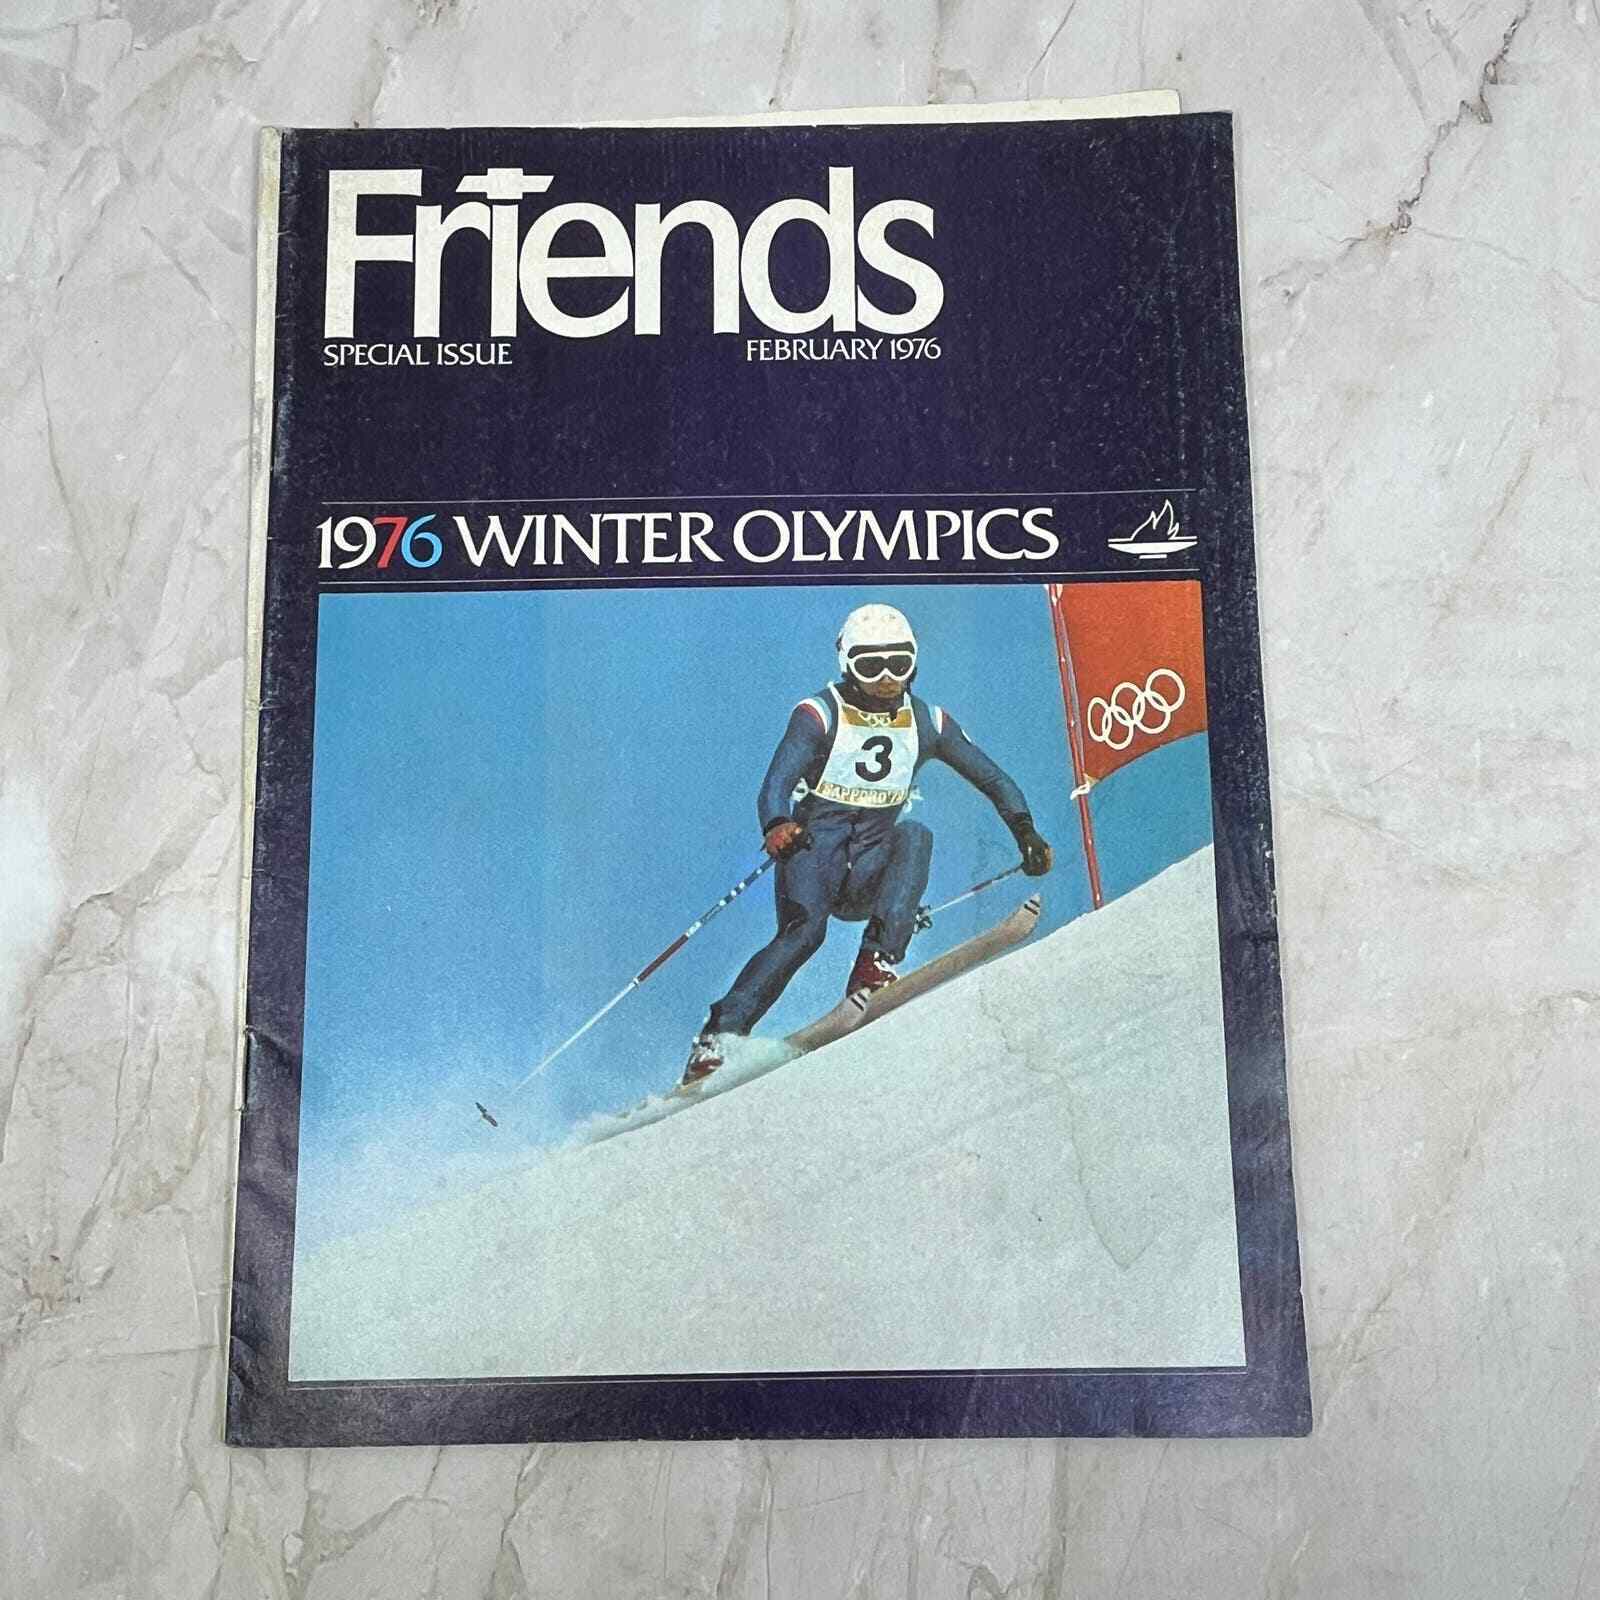 1976 Winter Olympics - Chevrolet FRIENDS Magazine - Special Issue TI9-P3